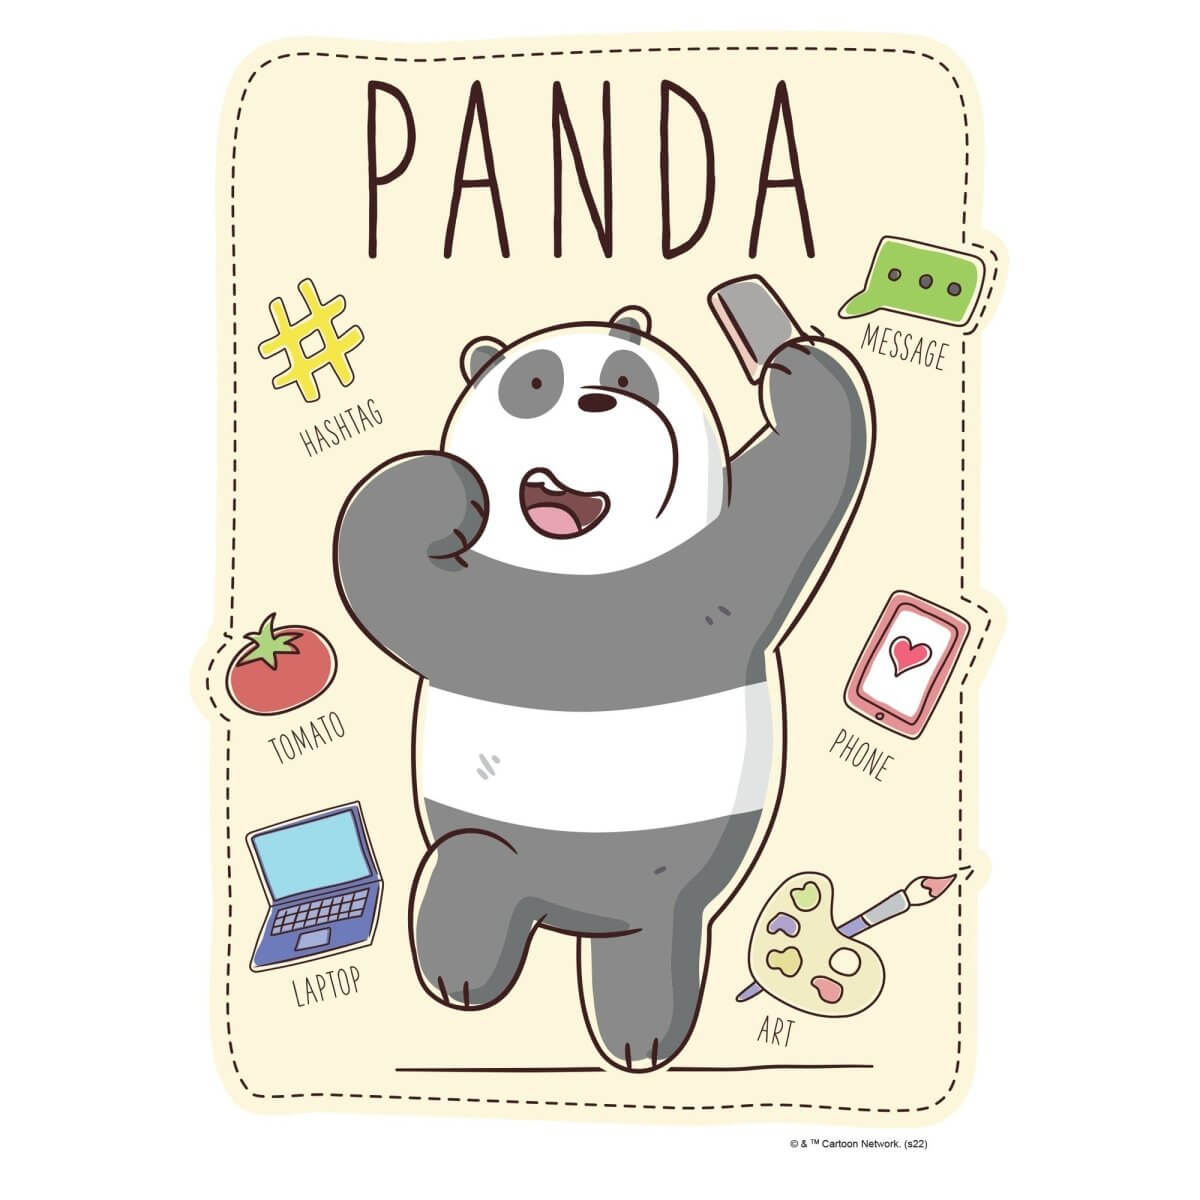 A panda bear with a phone in its hand - We Bare Bears